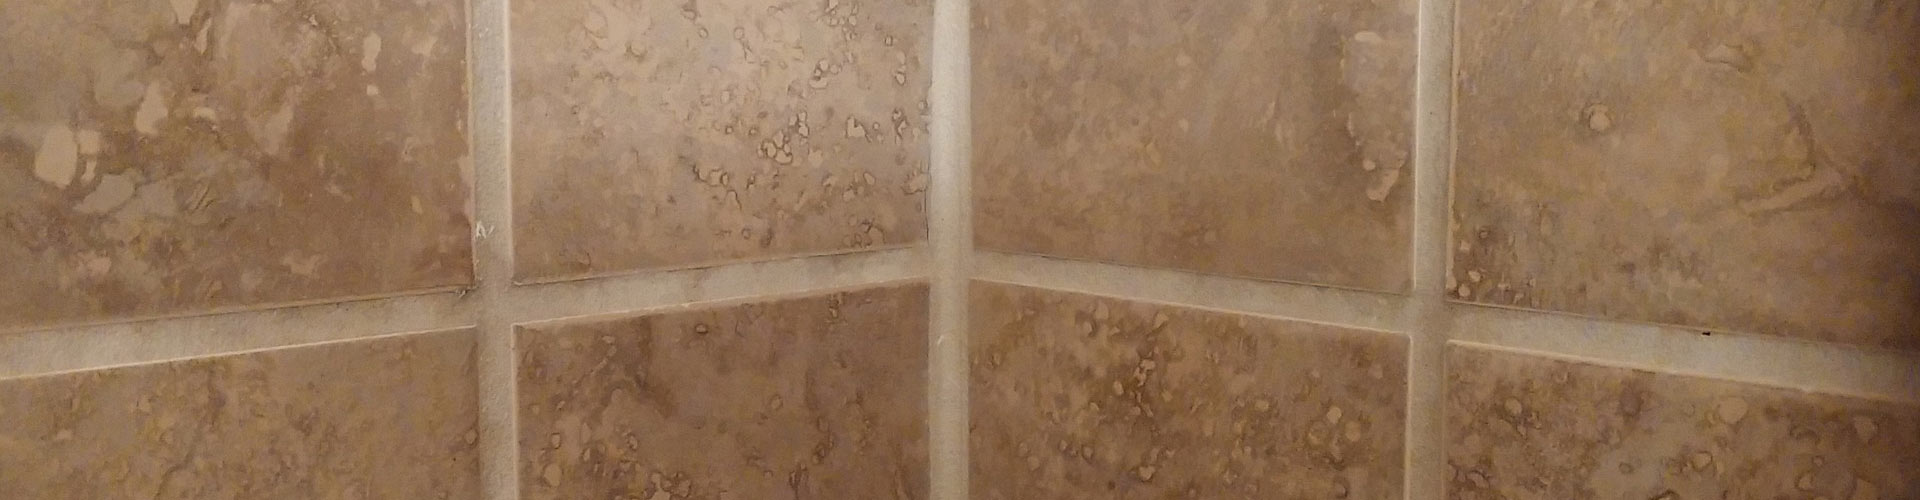 Grout and Tile Cleaning AZ